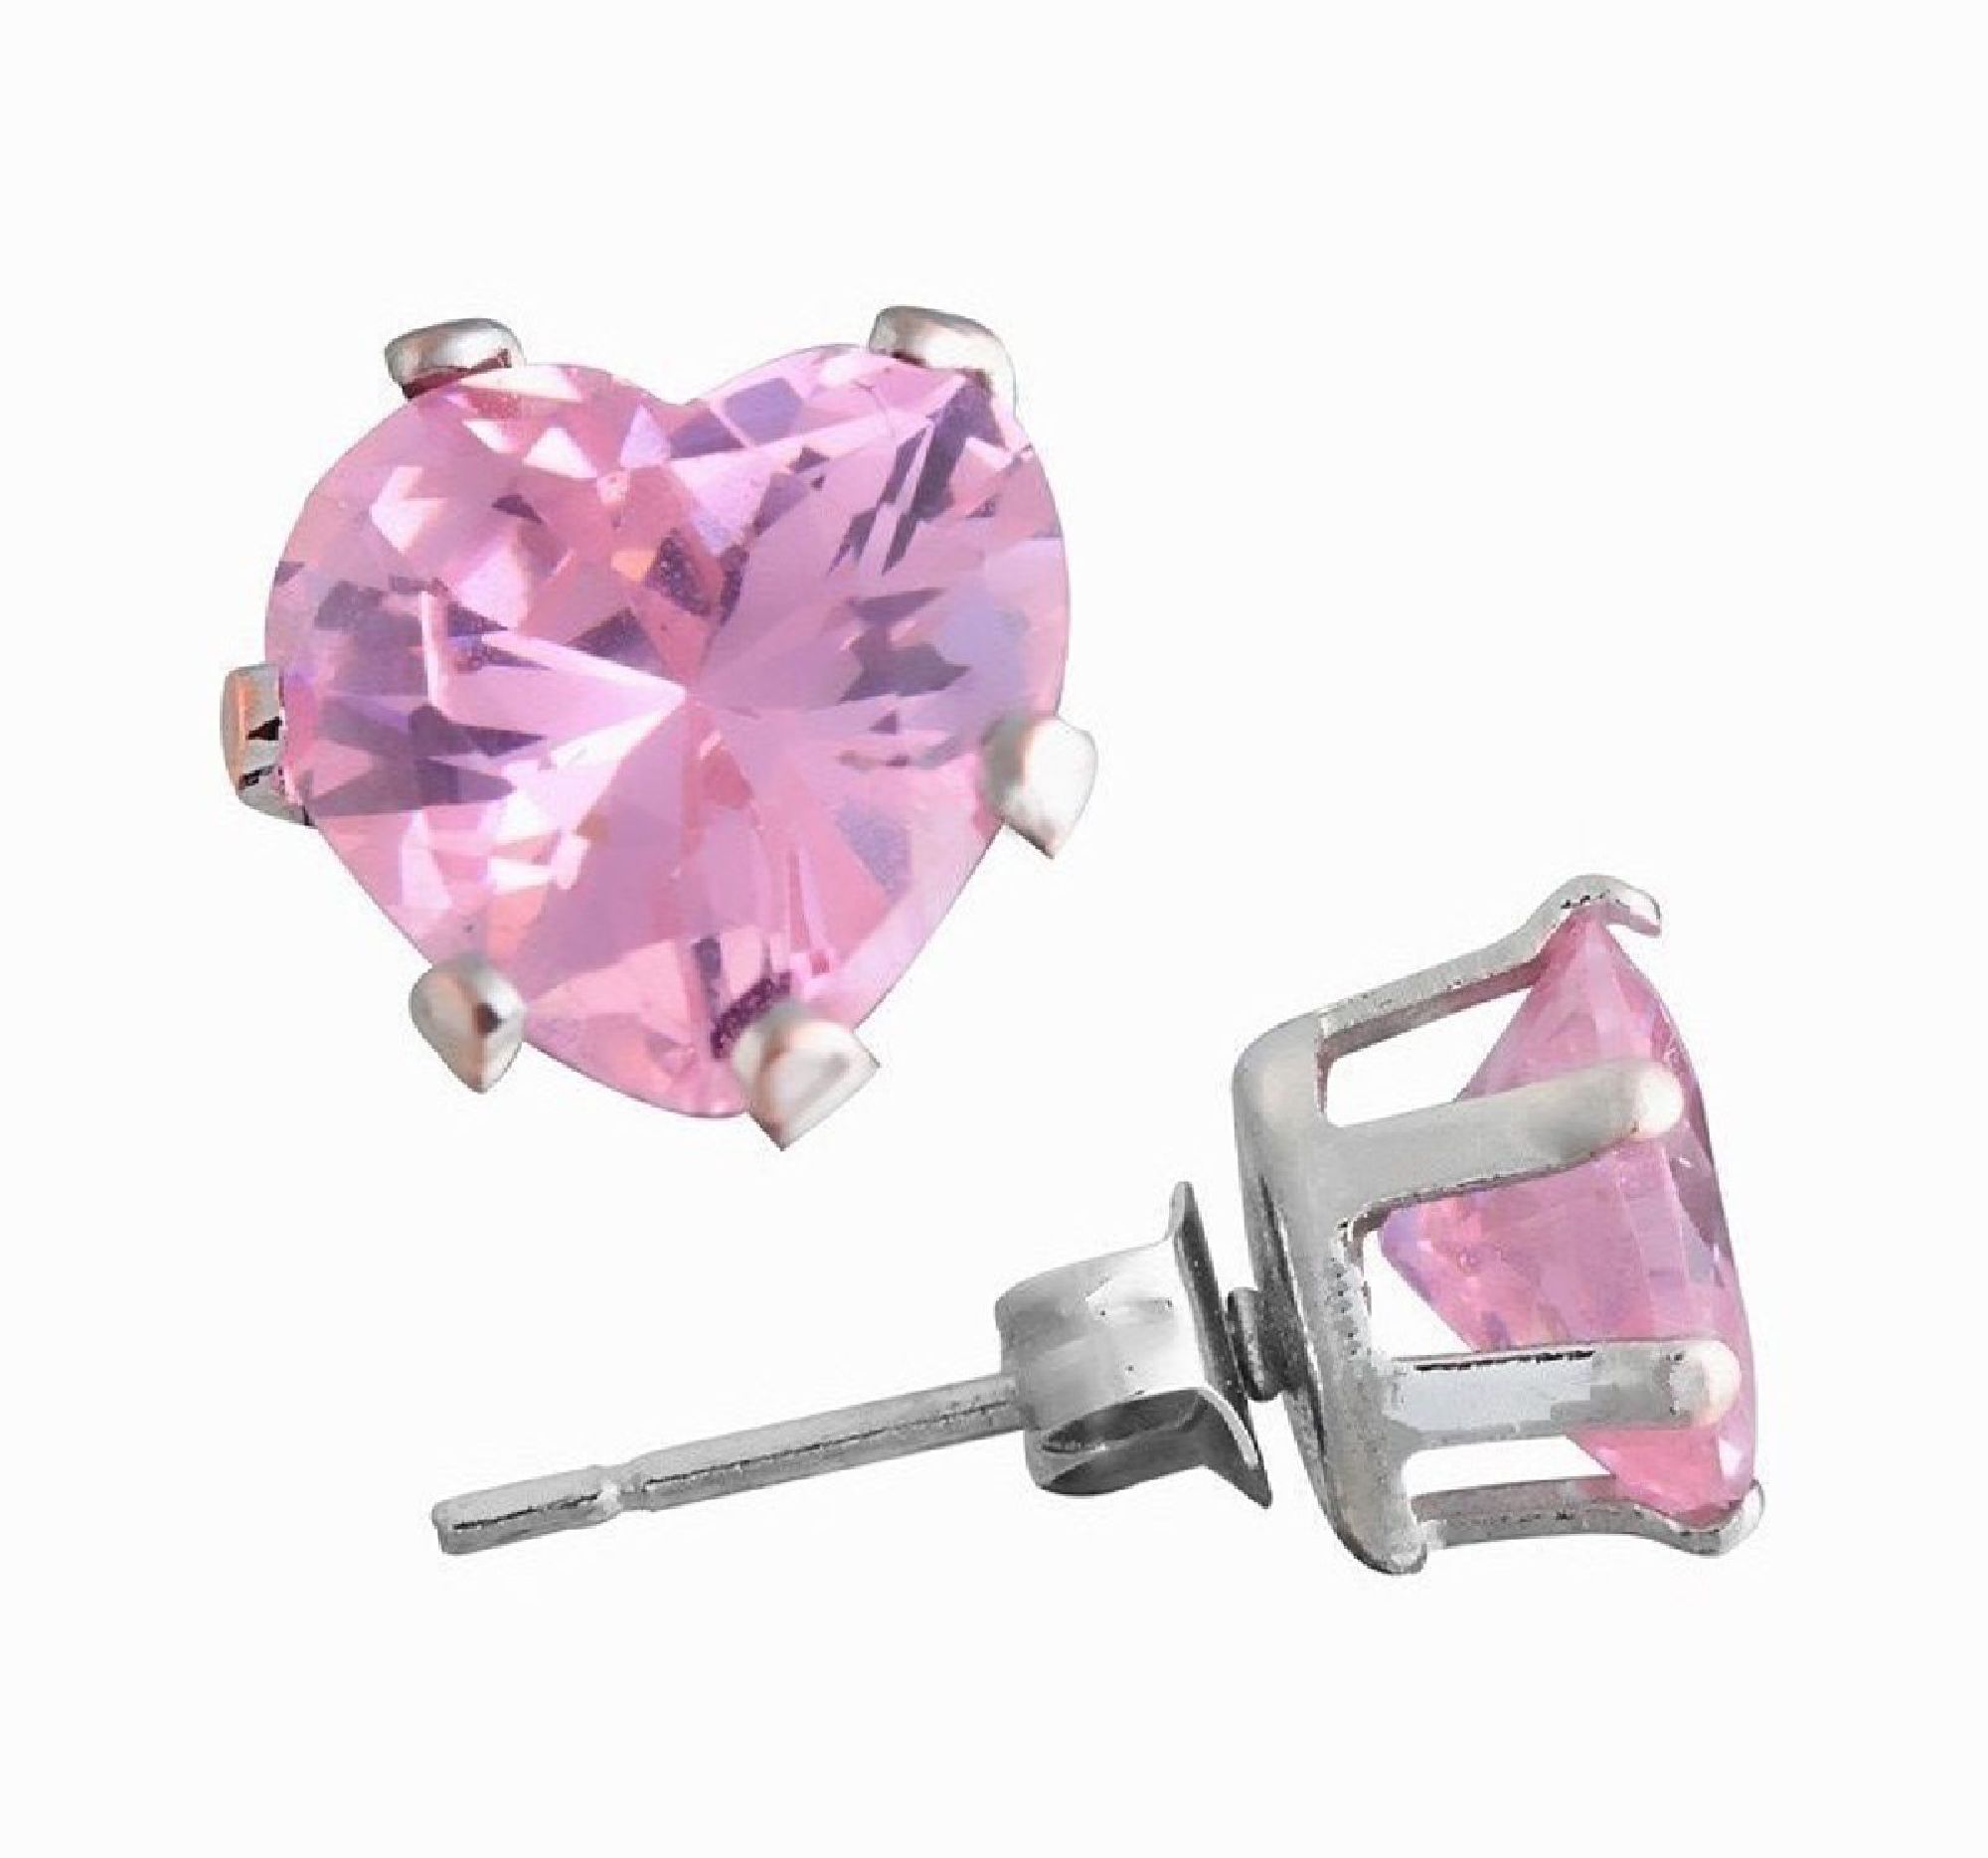 4 Carat Heart Shape Pink Diamond manmade Stud Earrings for Woman in Platinum over Sterling Silver Designed in France